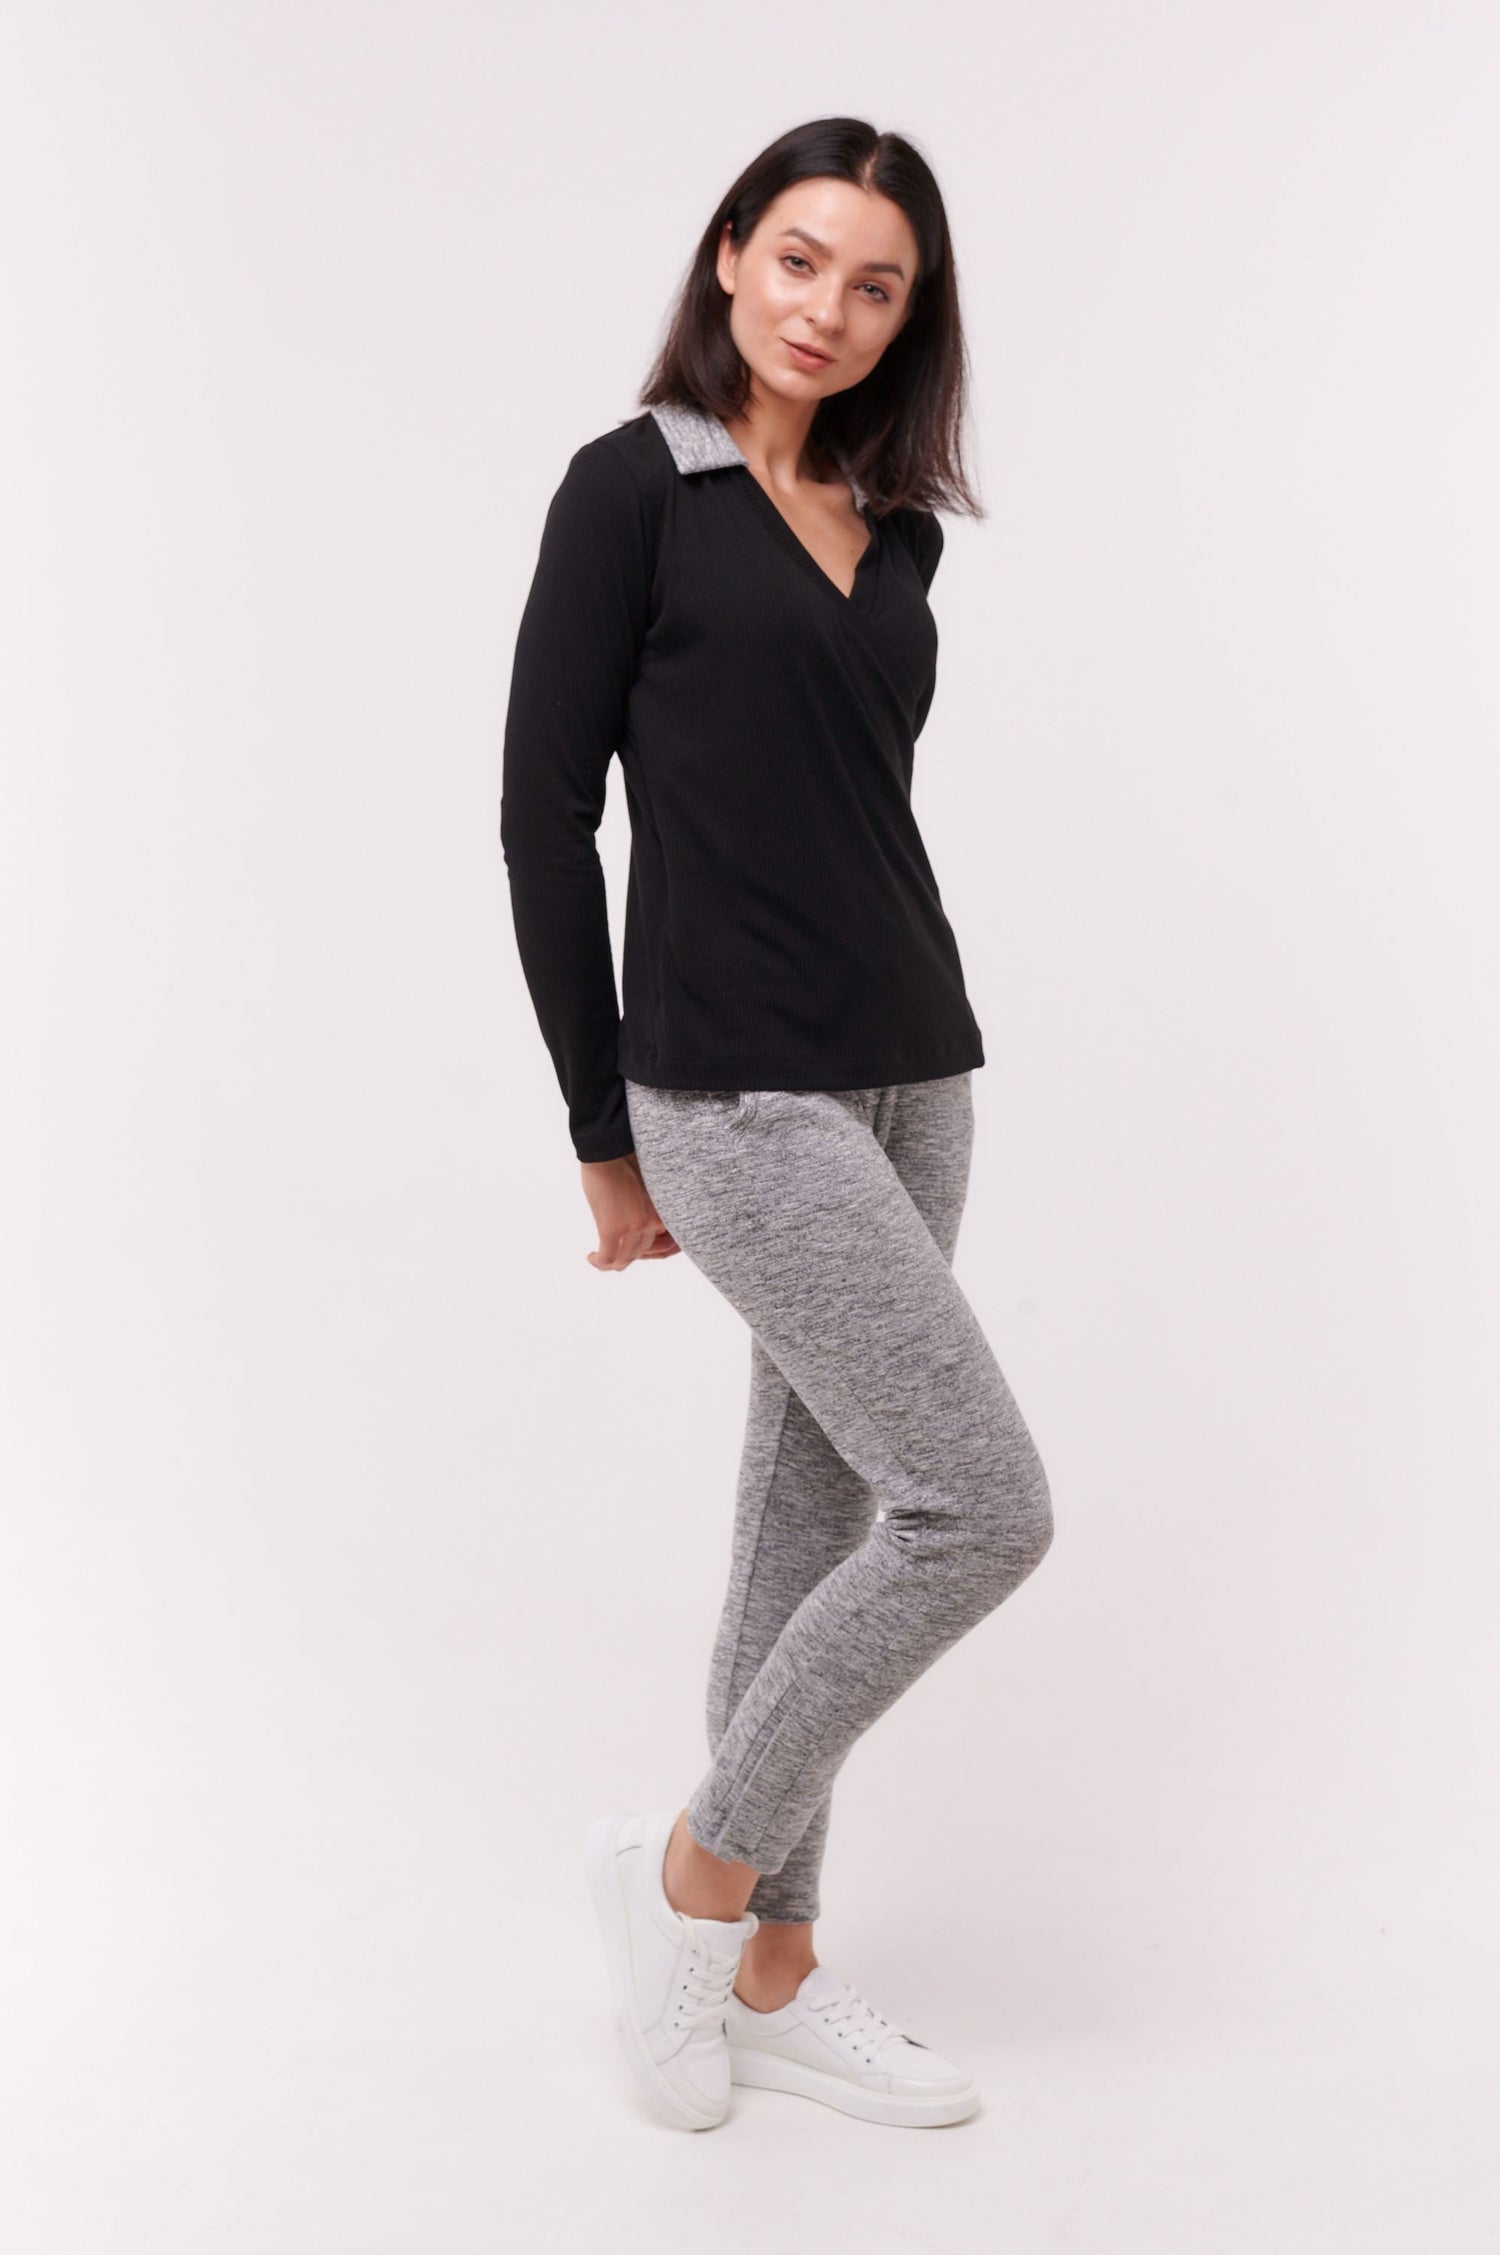 Woman wearing black long sleeve wrap top with side snap closures and grey pants.